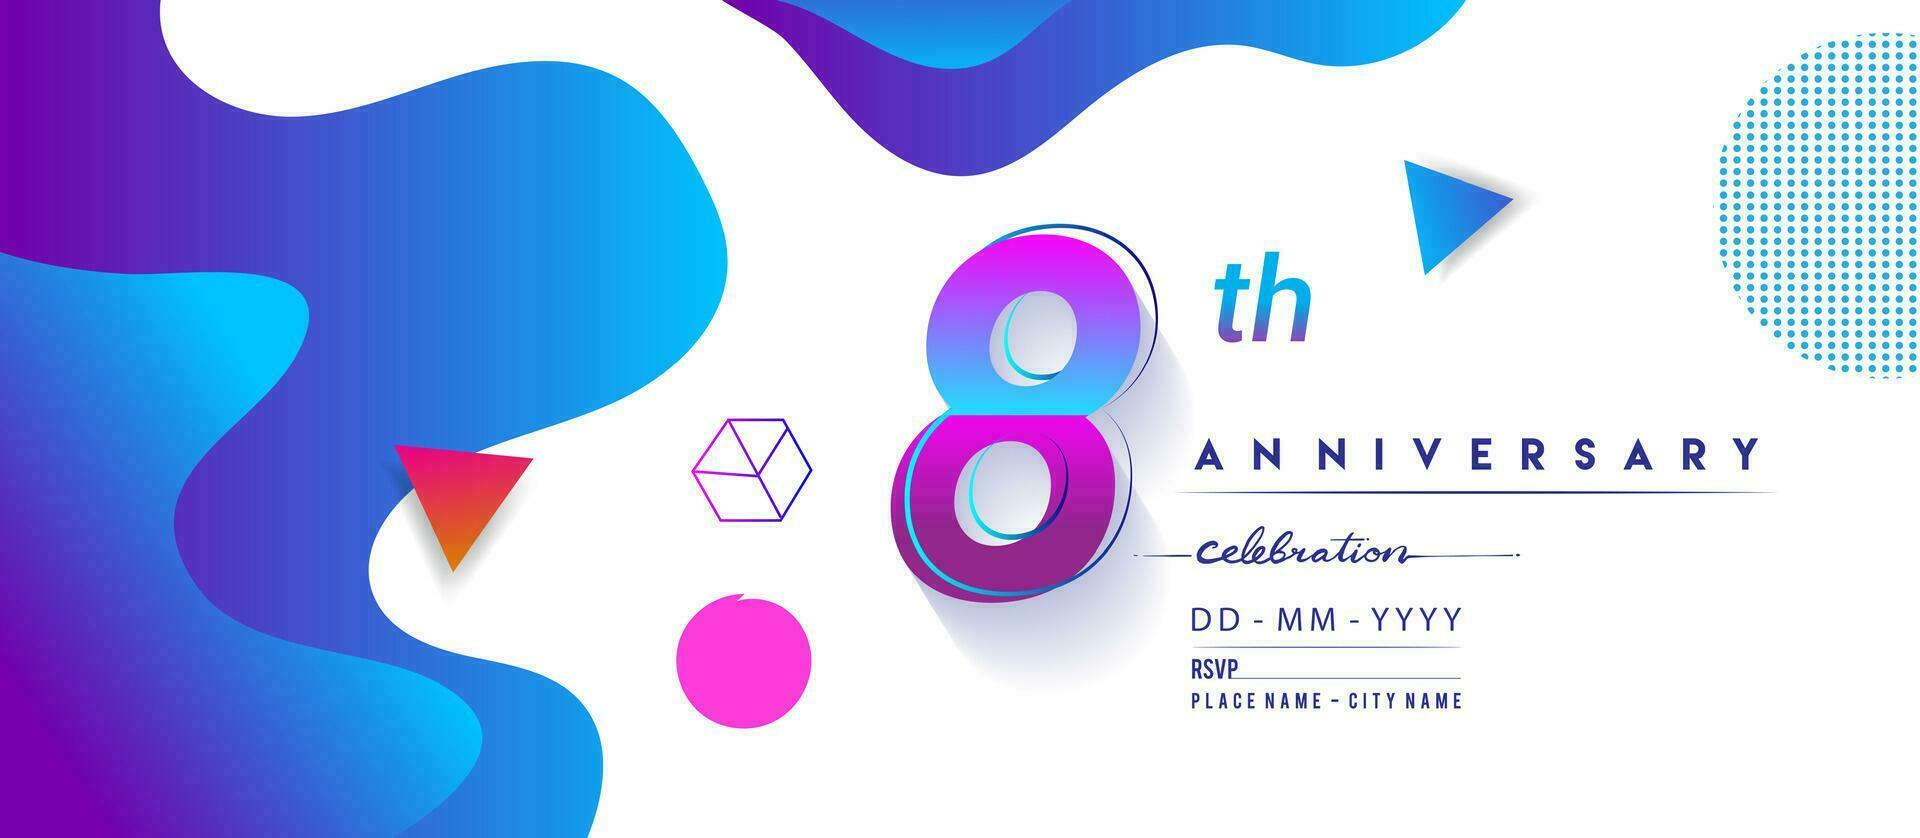 8th years anniversary logo, vector design birthday celebration with colorful geometric background and circles shape.